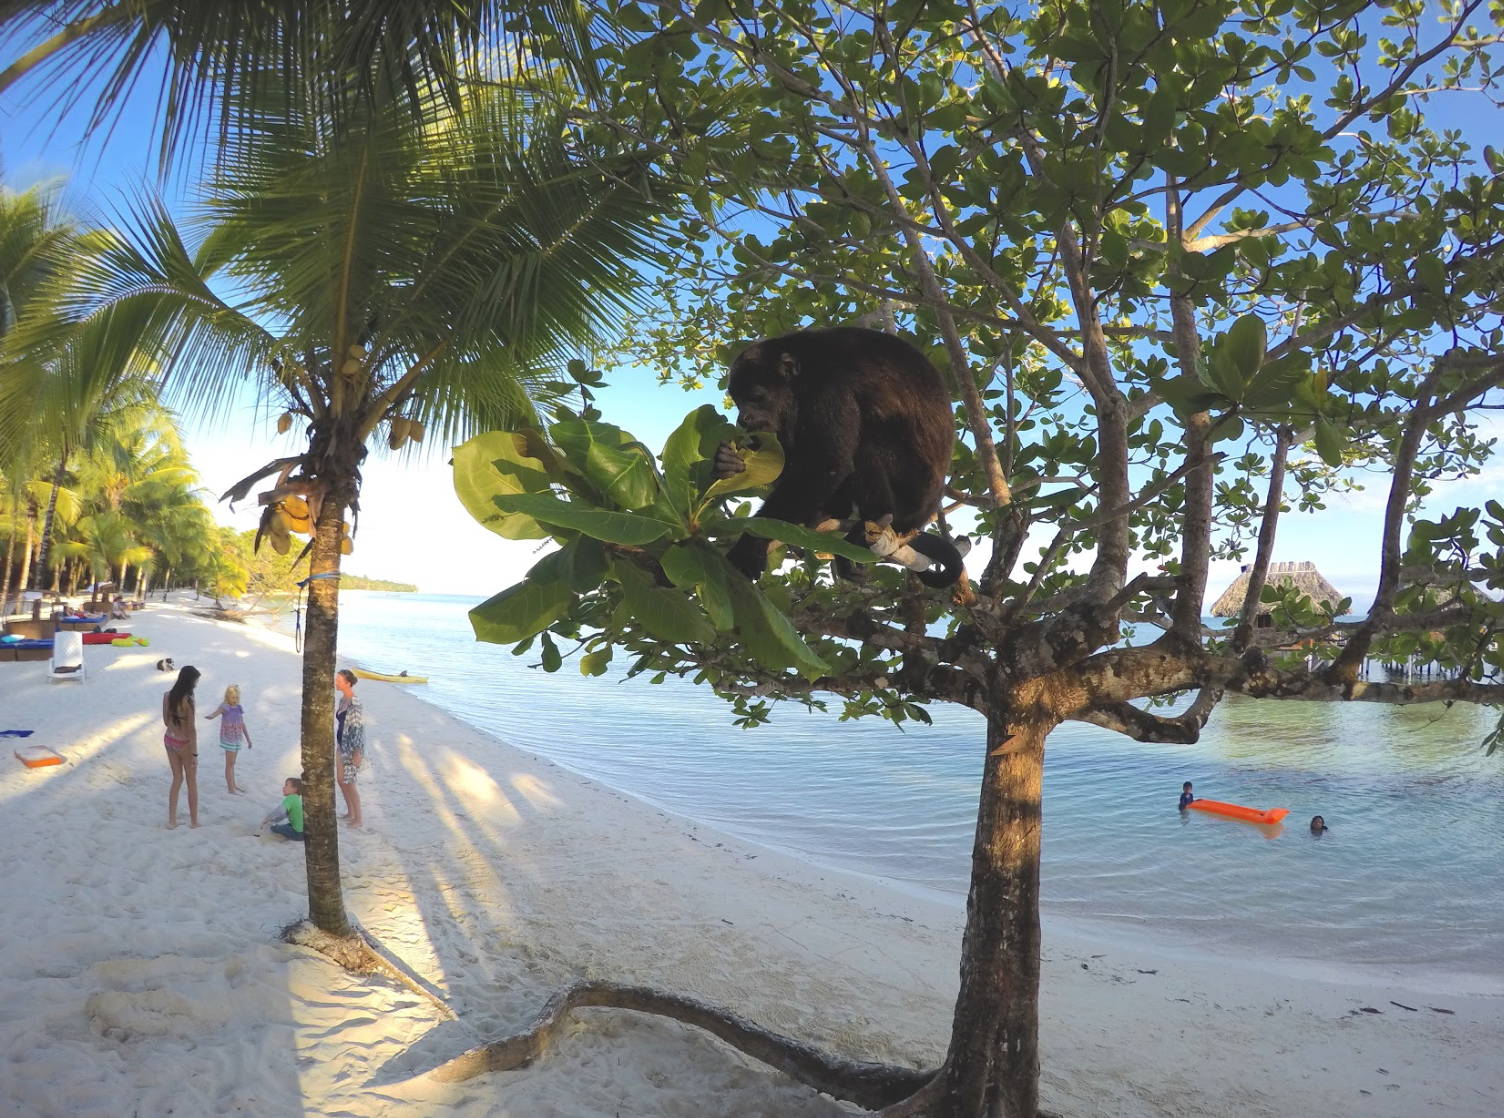 A monkey in a tree on the beach in Panama